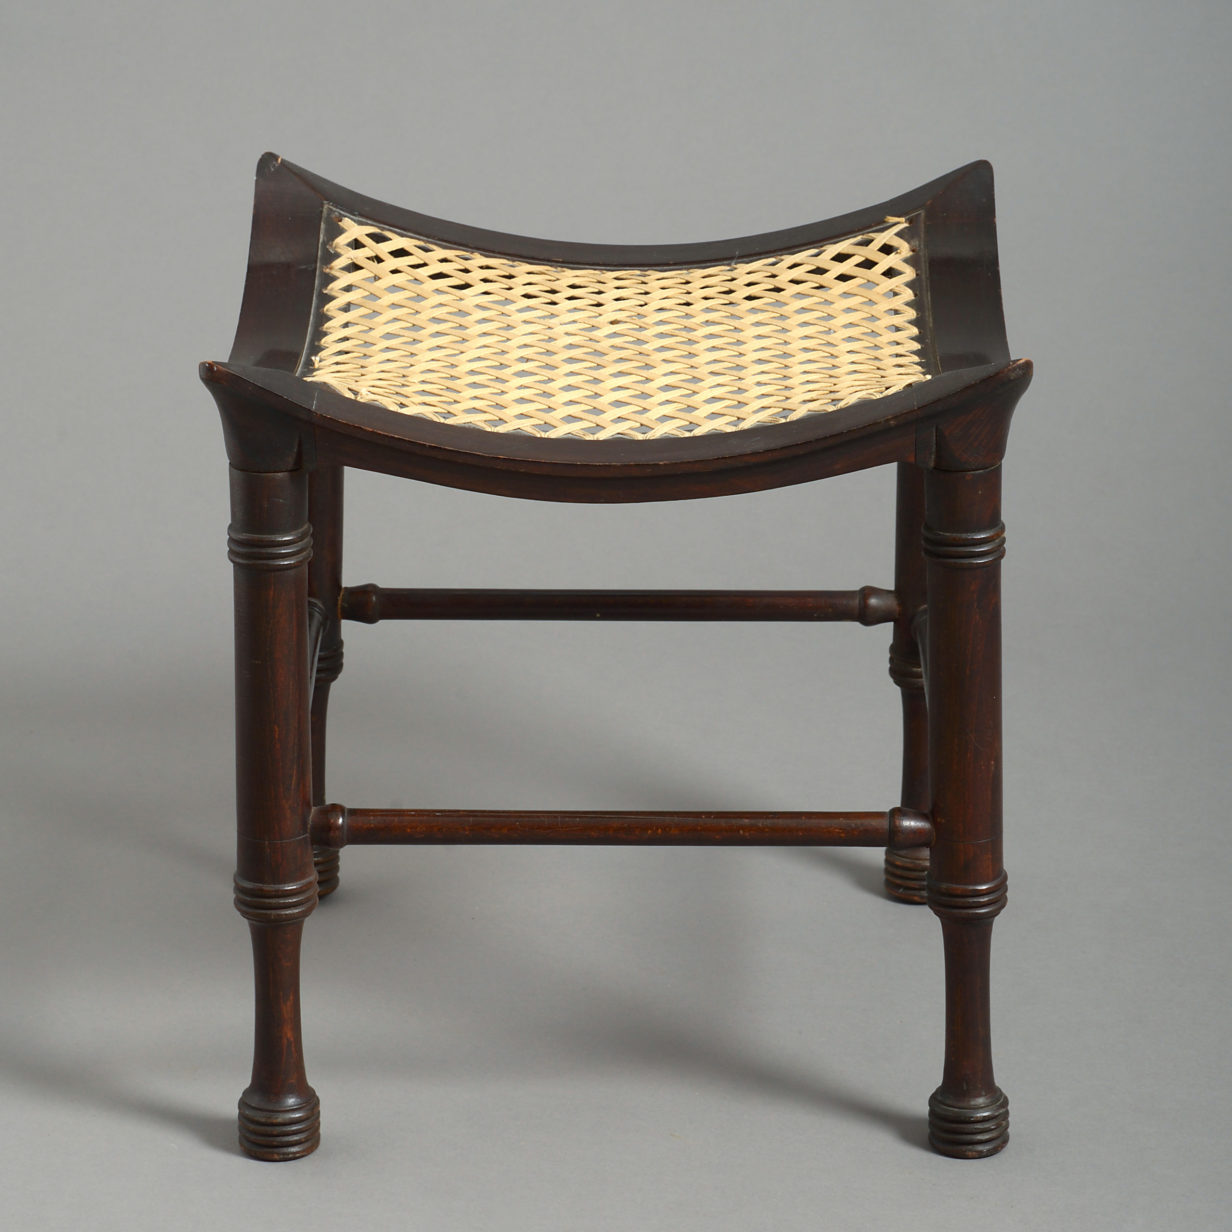 An early 20th century ebonised thebes stool